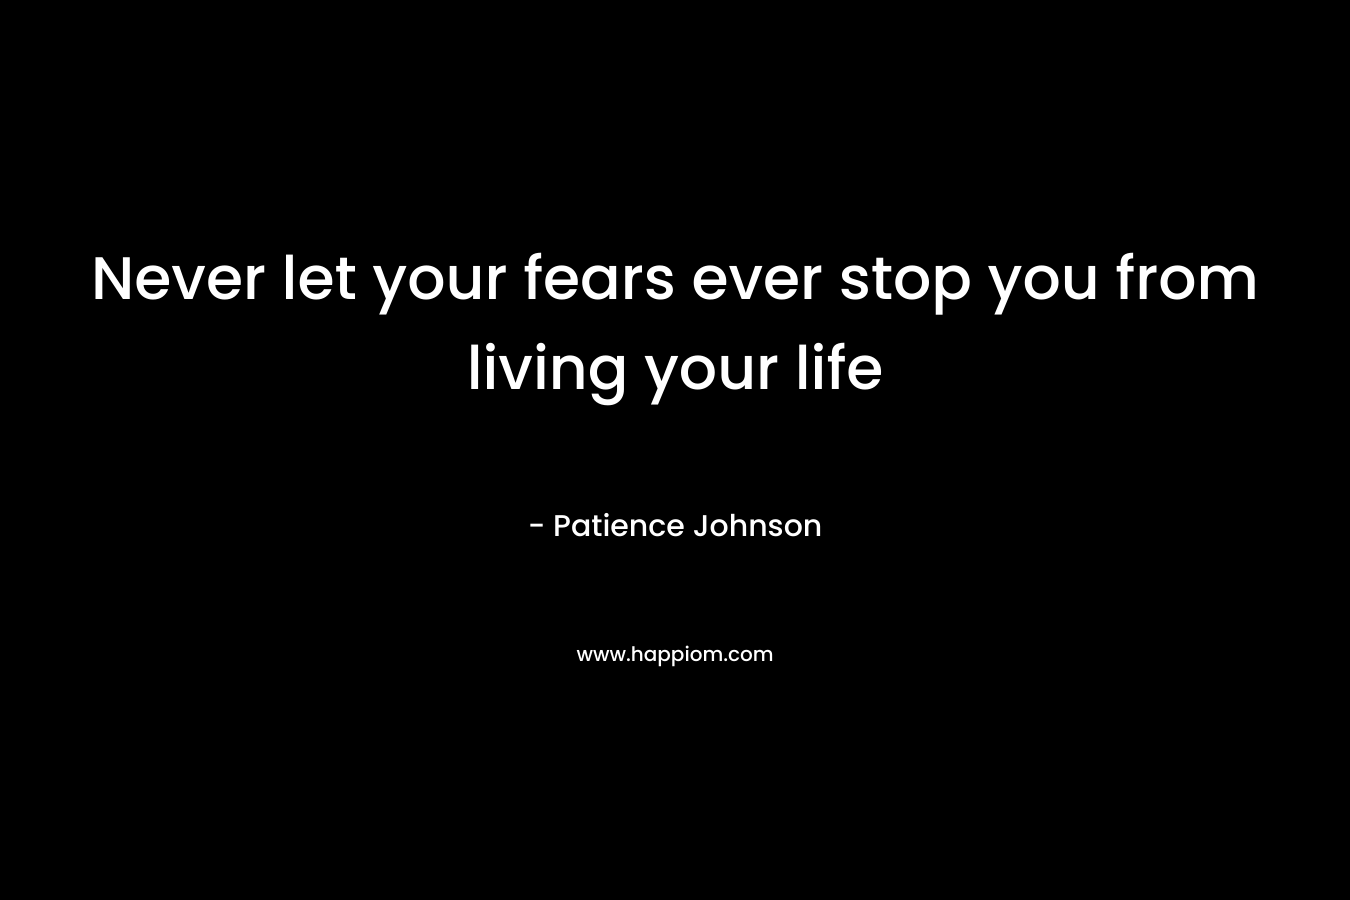 Never let your fears ever stop you from living your life